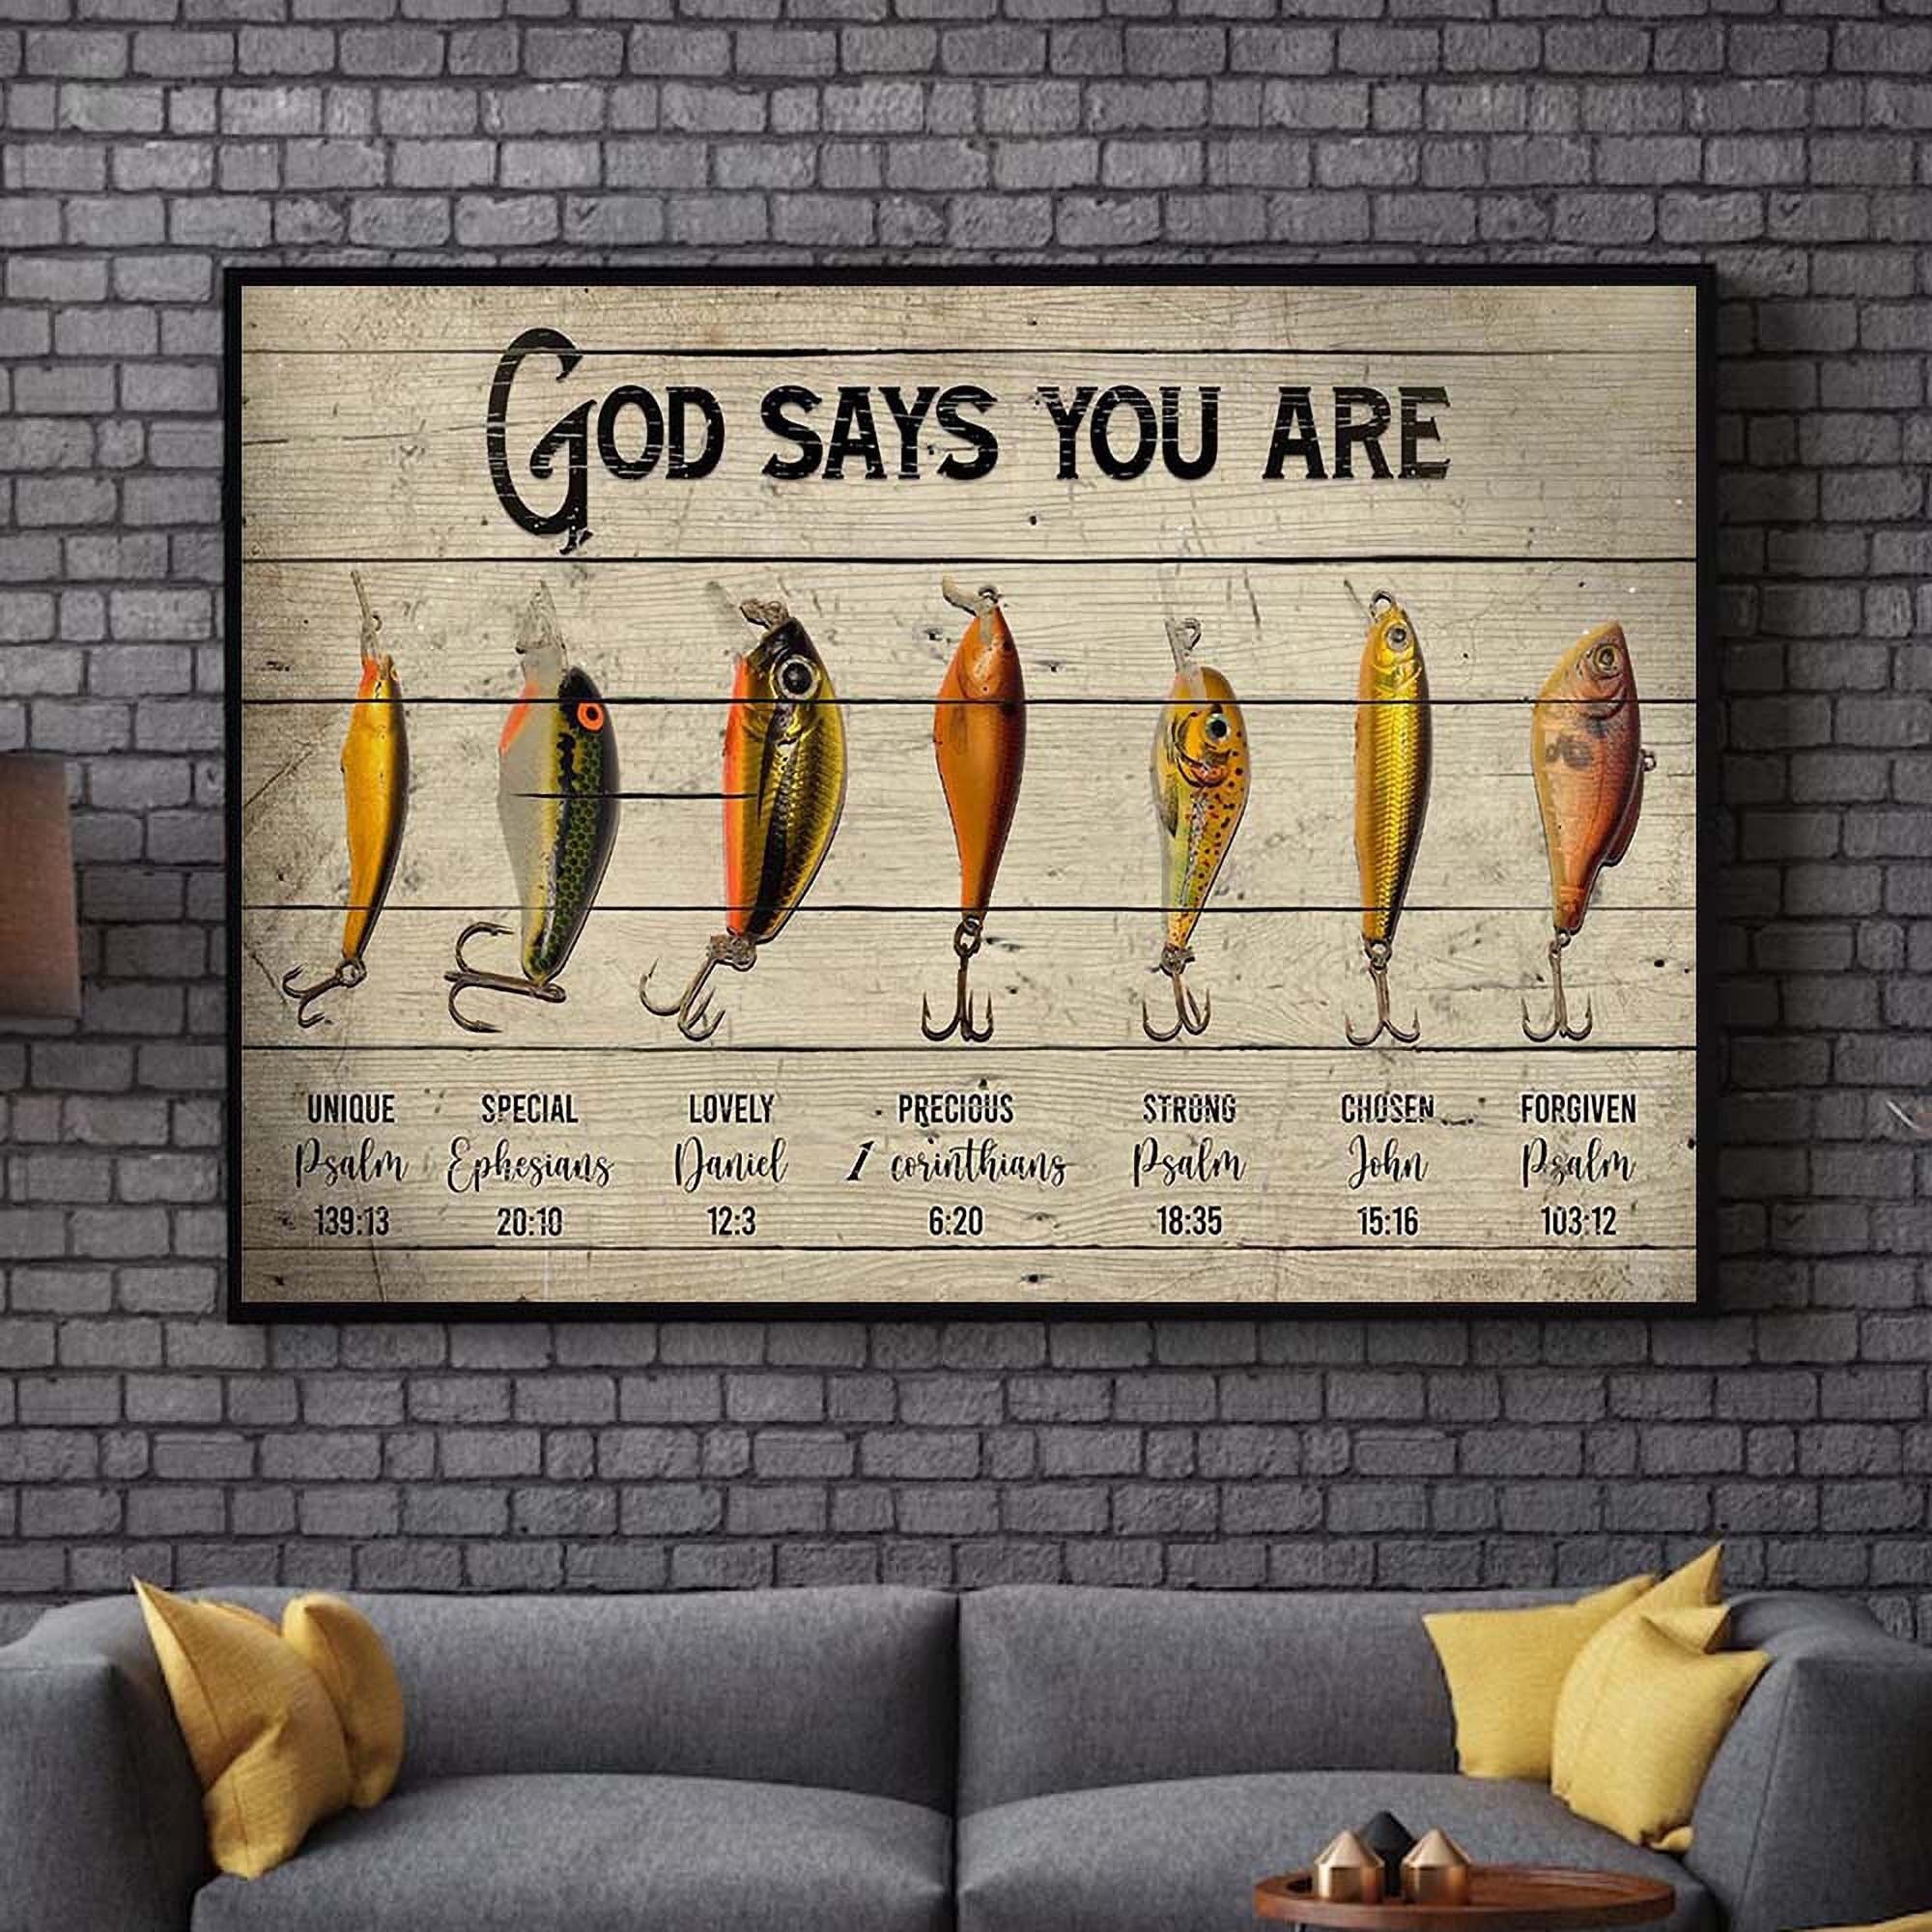 Fishing Posters 